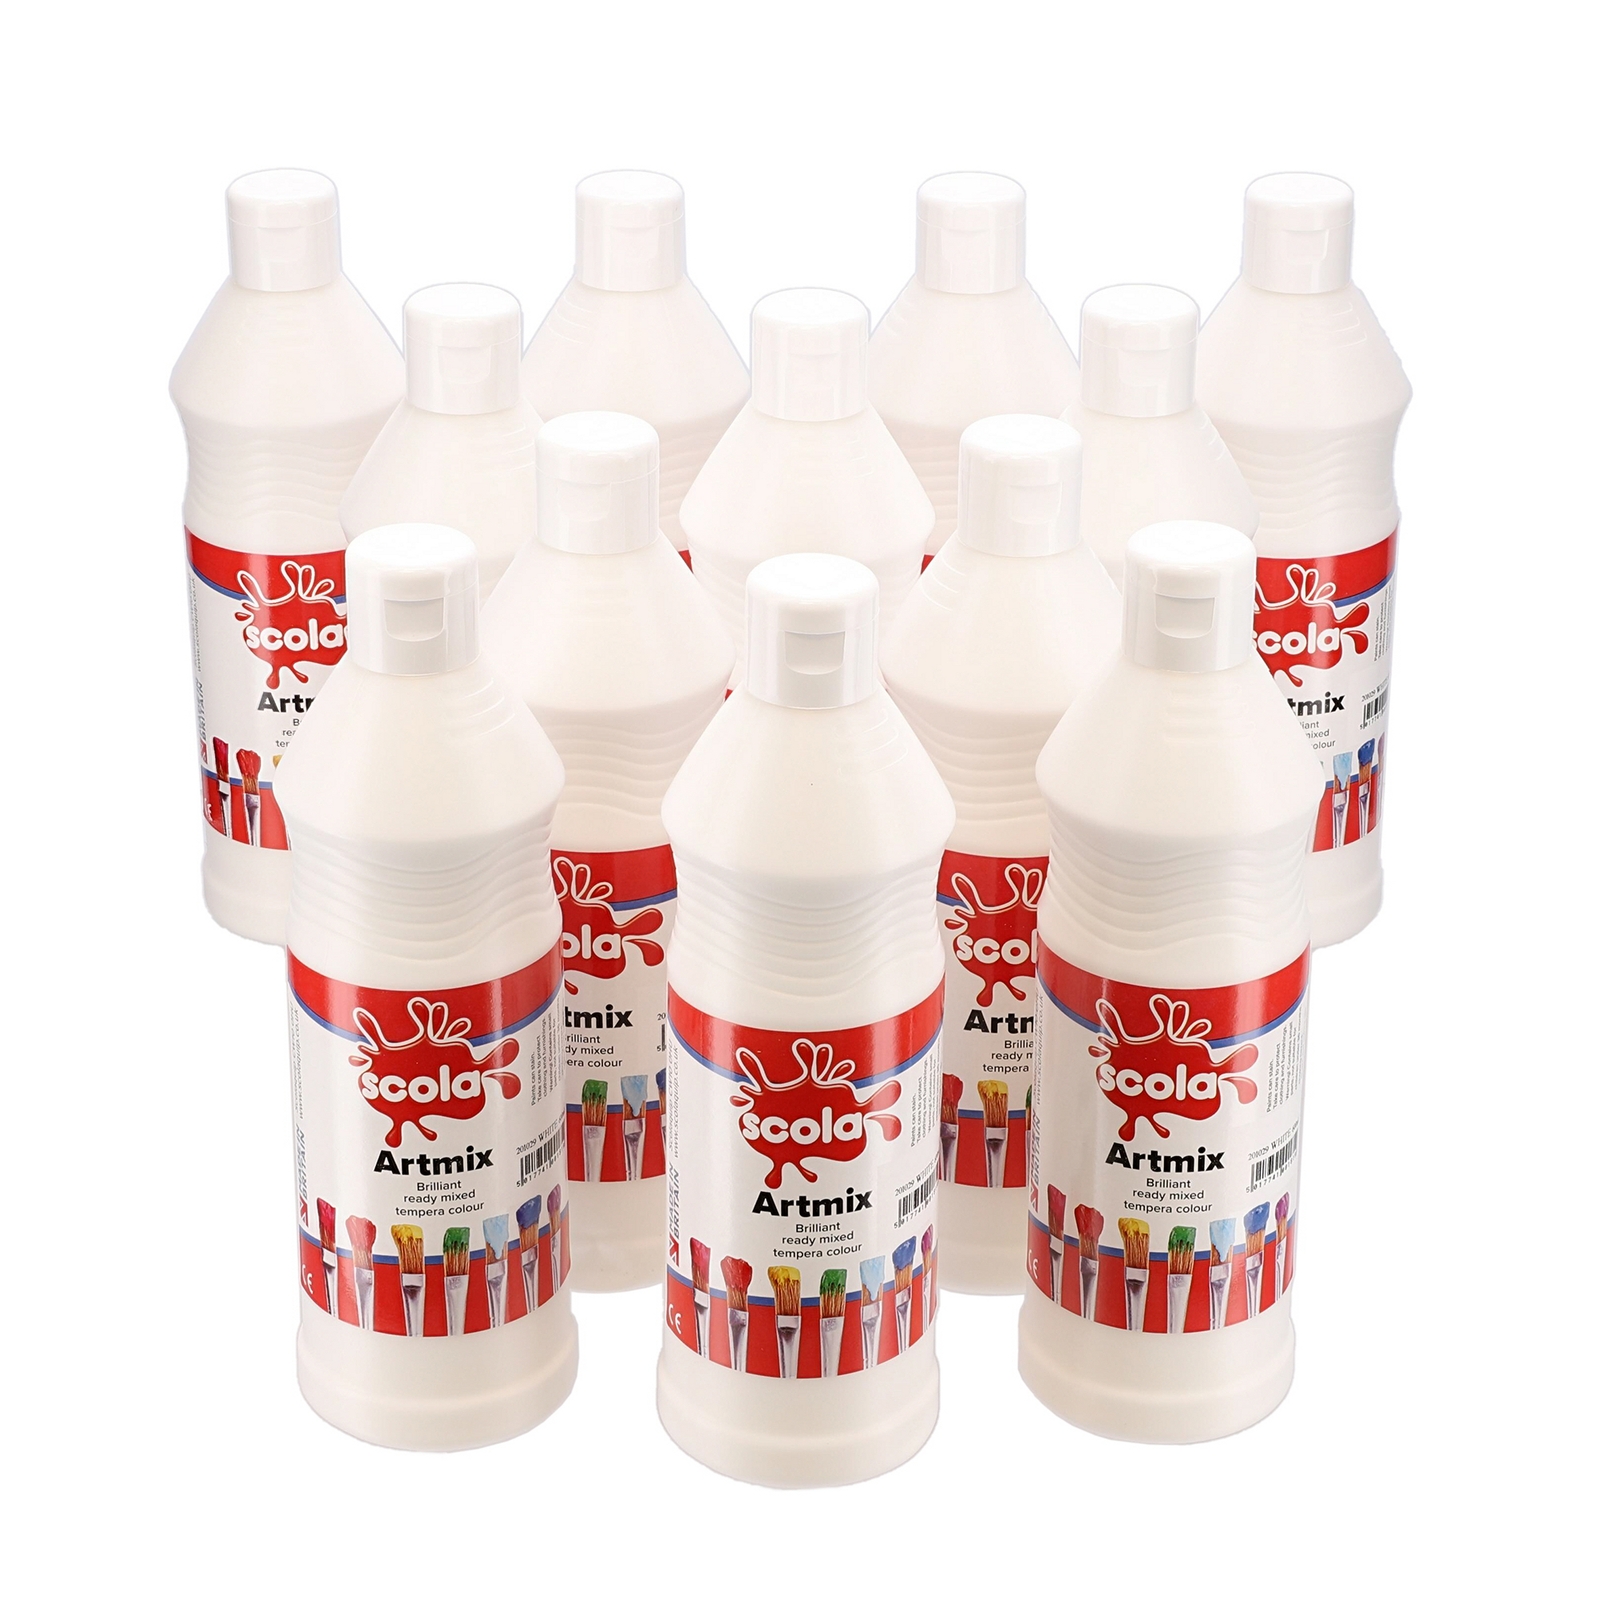 Scola  White Artmix Ready Mixed Paint - 600ml - Pack of 12